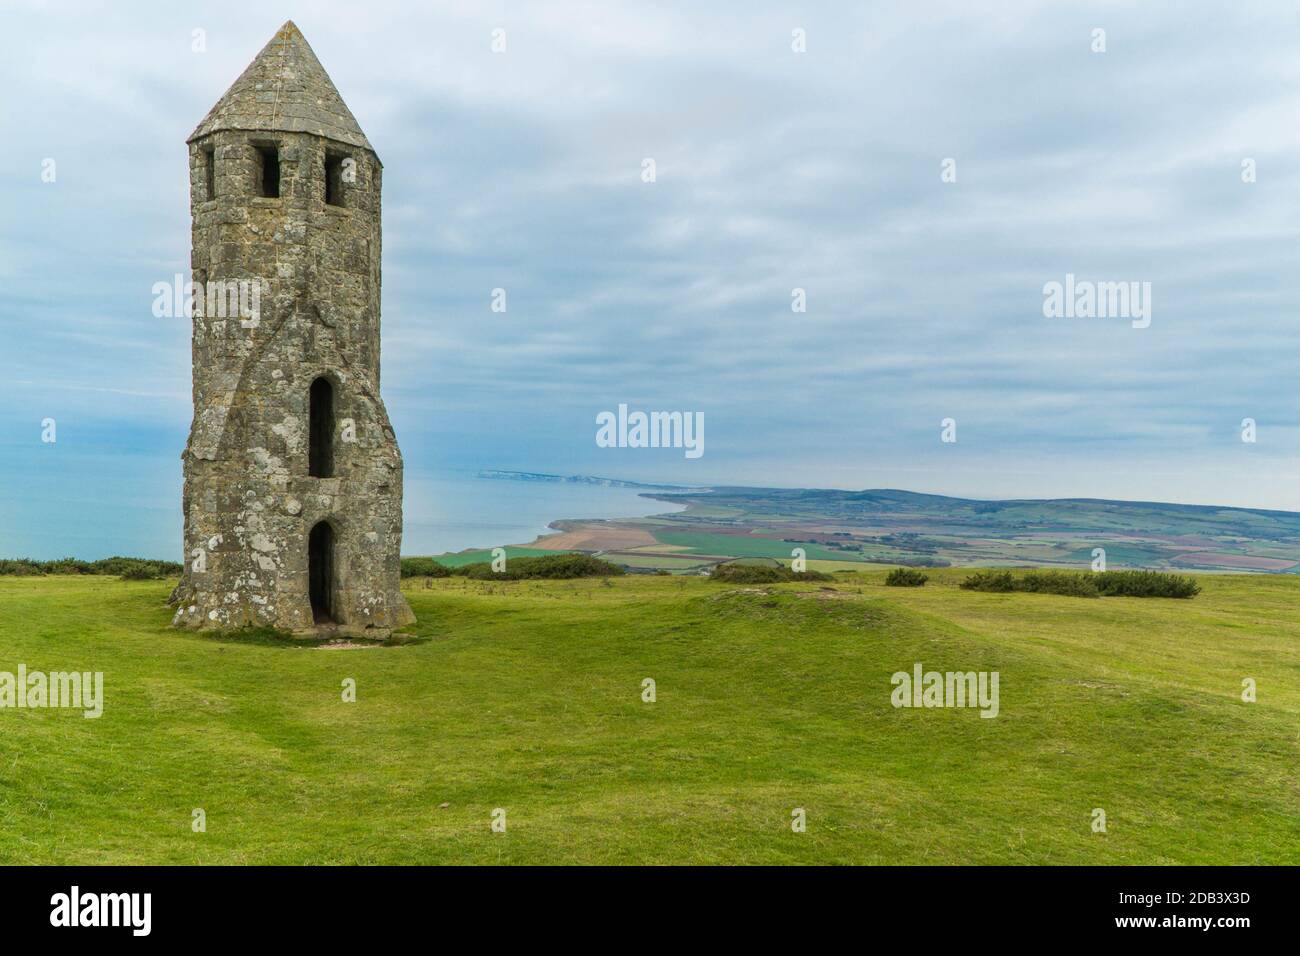 All that survives of St Catherine's Oratory built in 1328 and known locally as the Pepperpot, Ventnor Isle of Wight UK. October 2020 Stock Photo